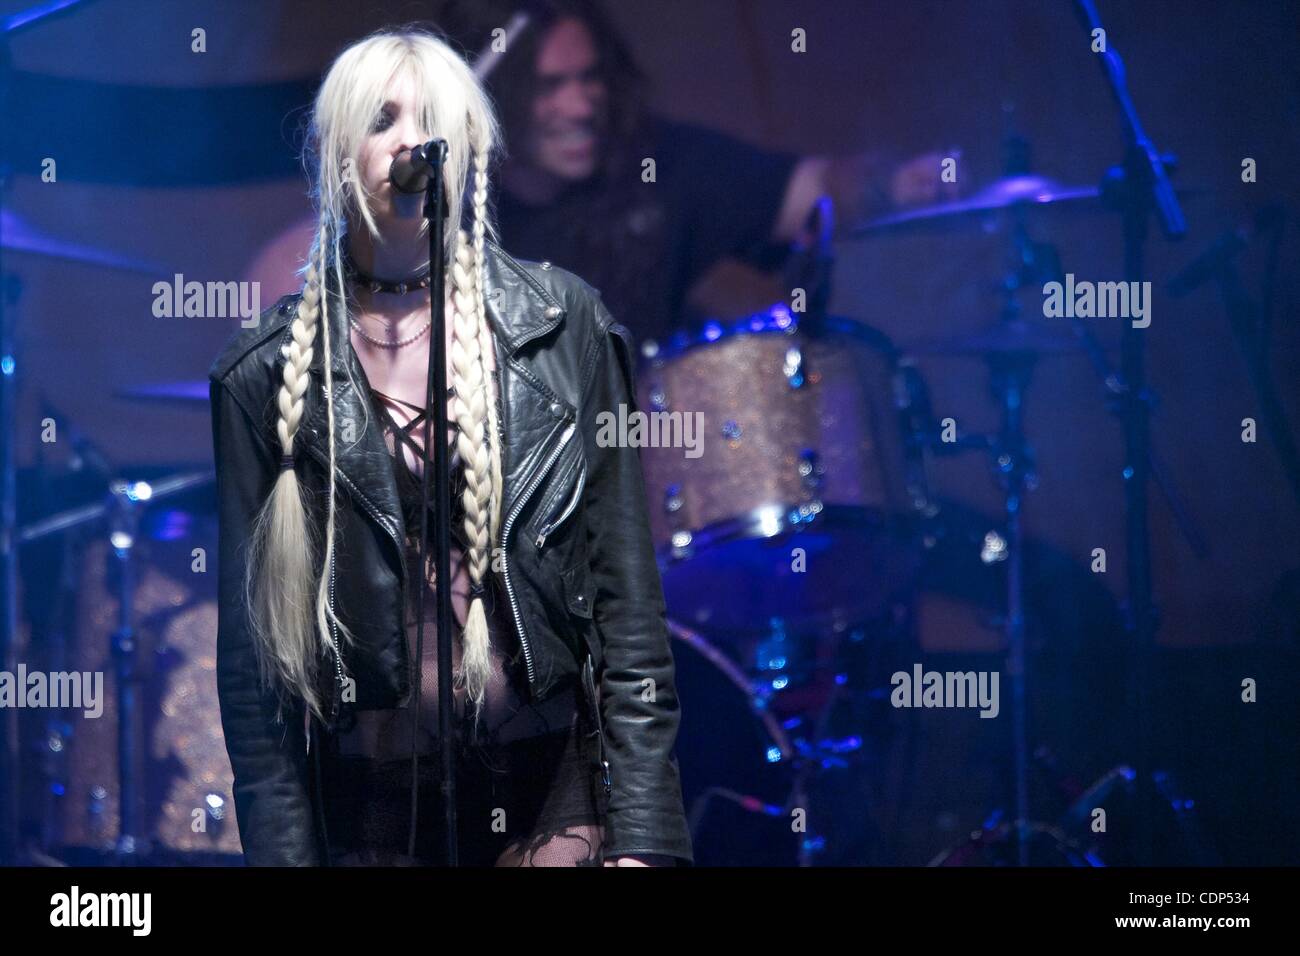 July 7, 2011 - Madrid, Spain - Taylor Momsen of The Pretty Reckless performs on stage at the Sala Caracol in Madrid (Credit Image: © Jack Abuin/ZUMAPRESS.com) Stock Photo